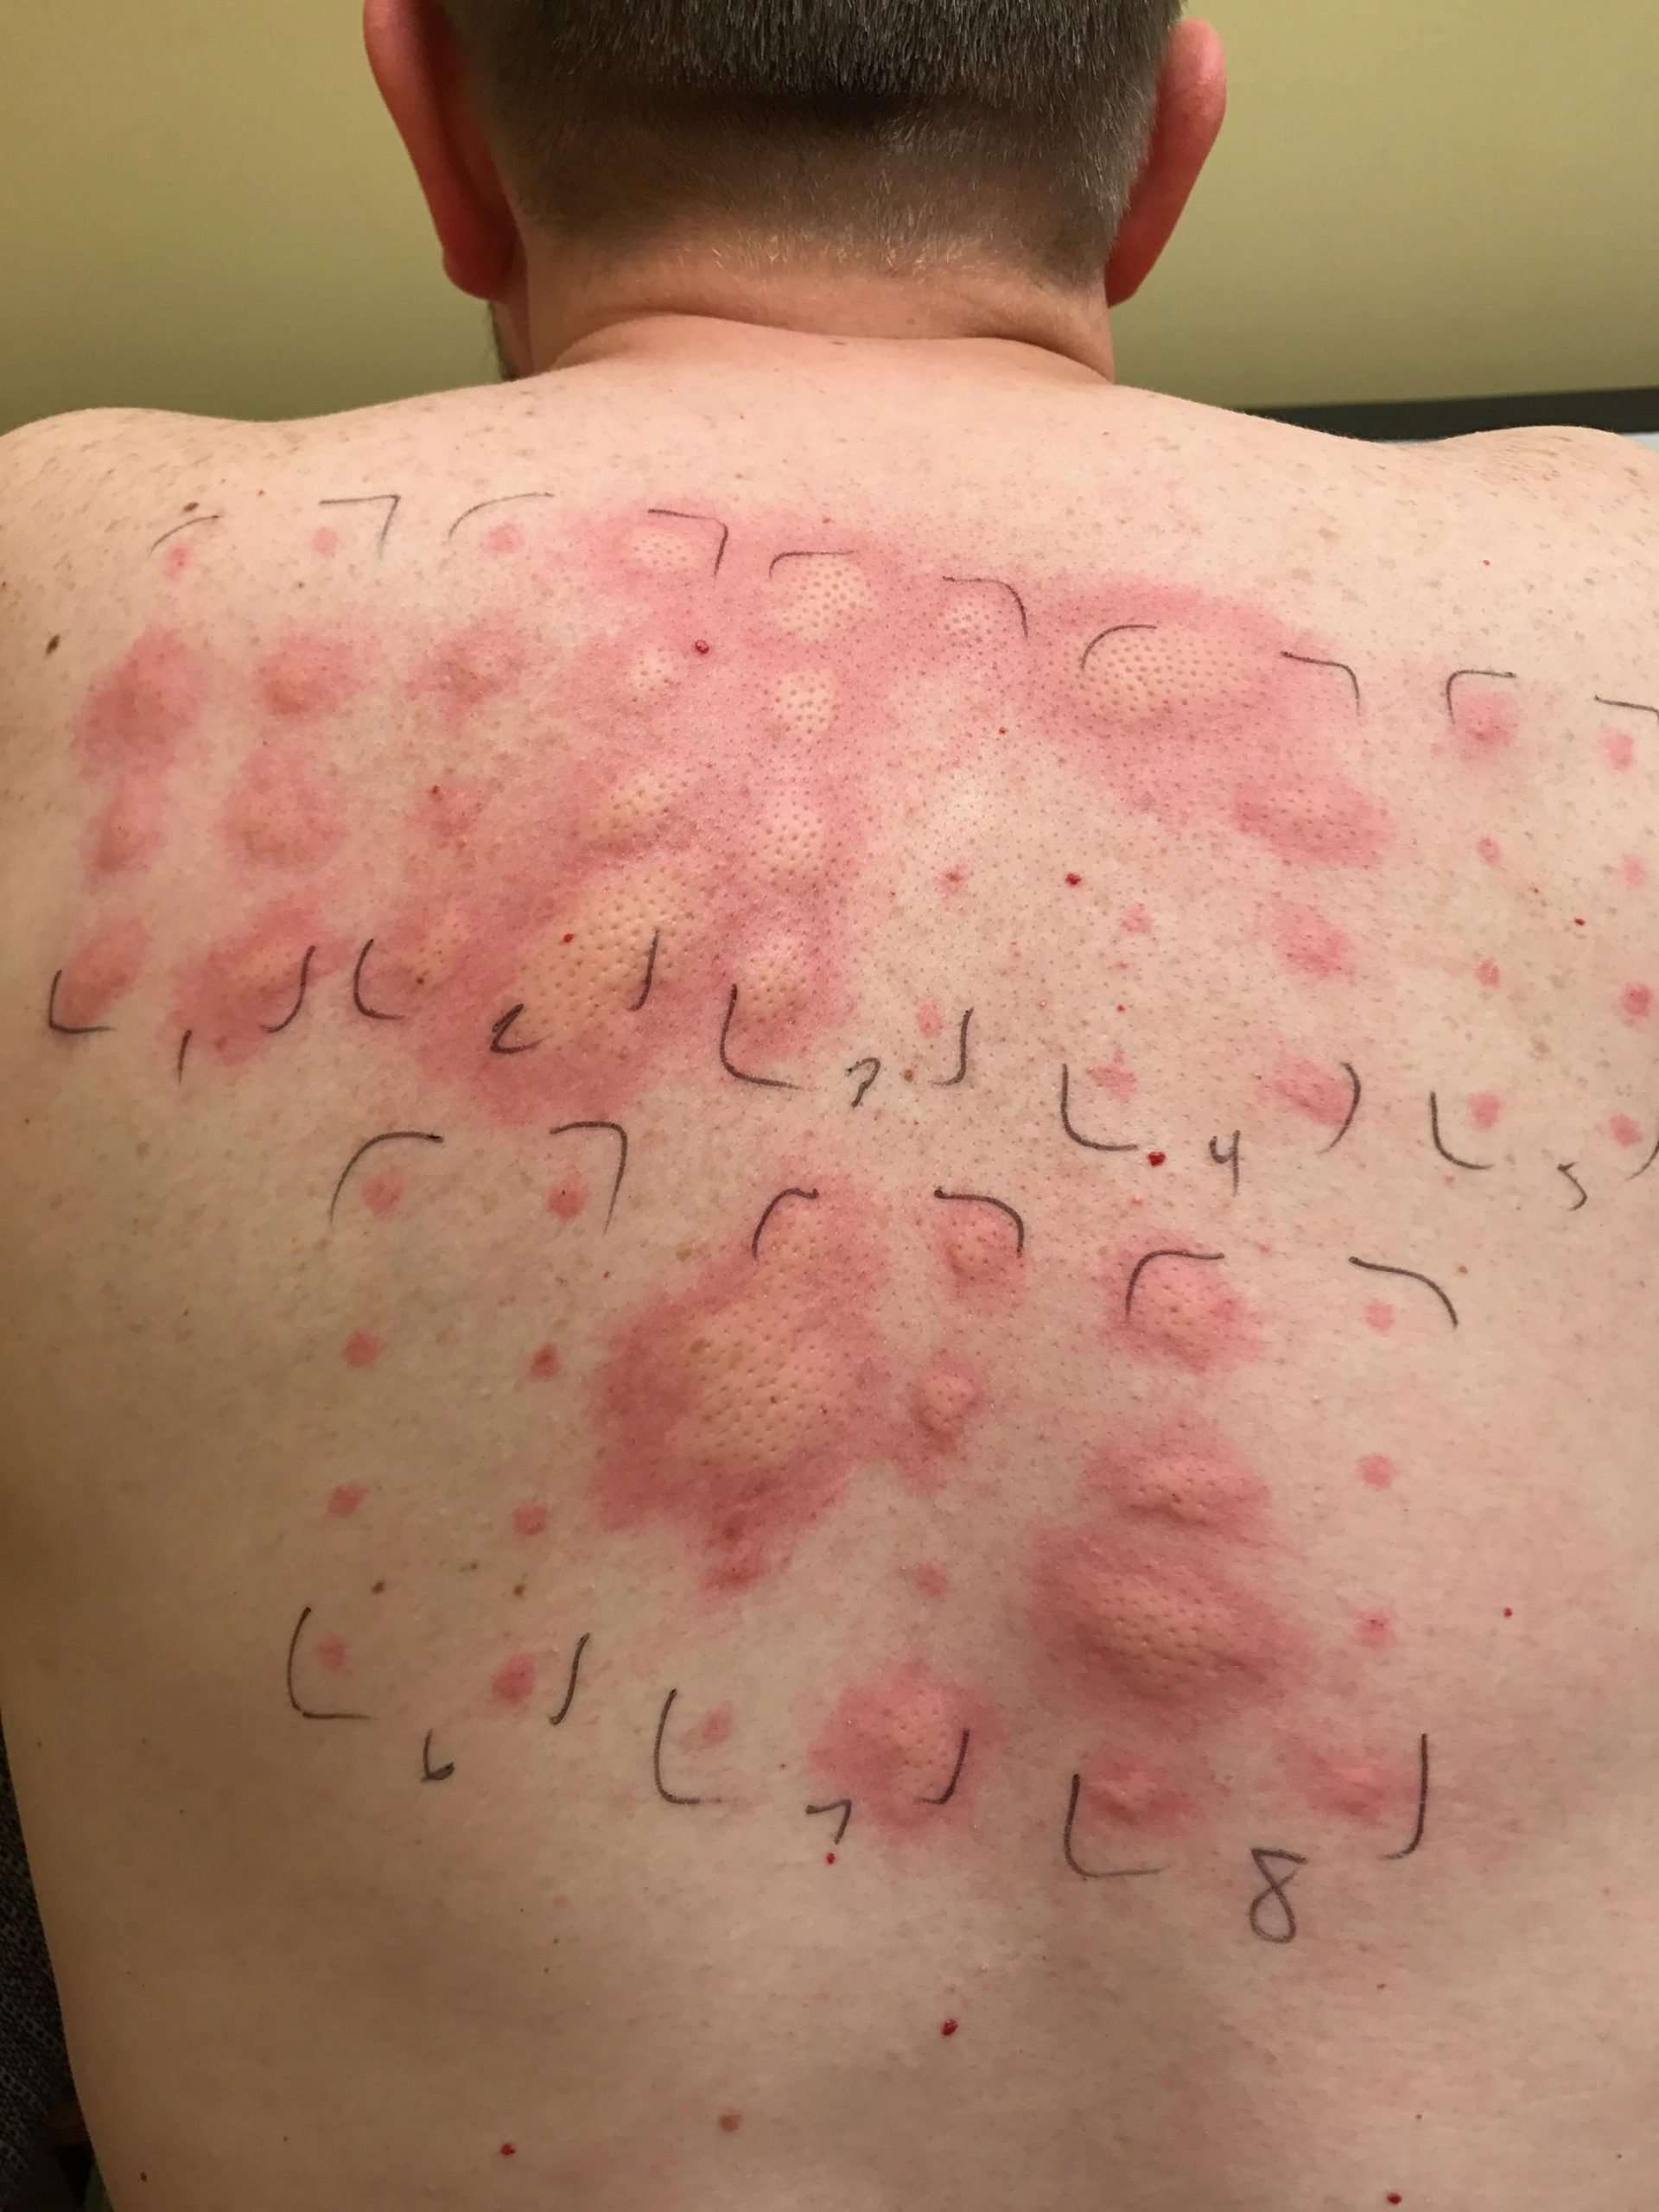 Had an allergy test done. I